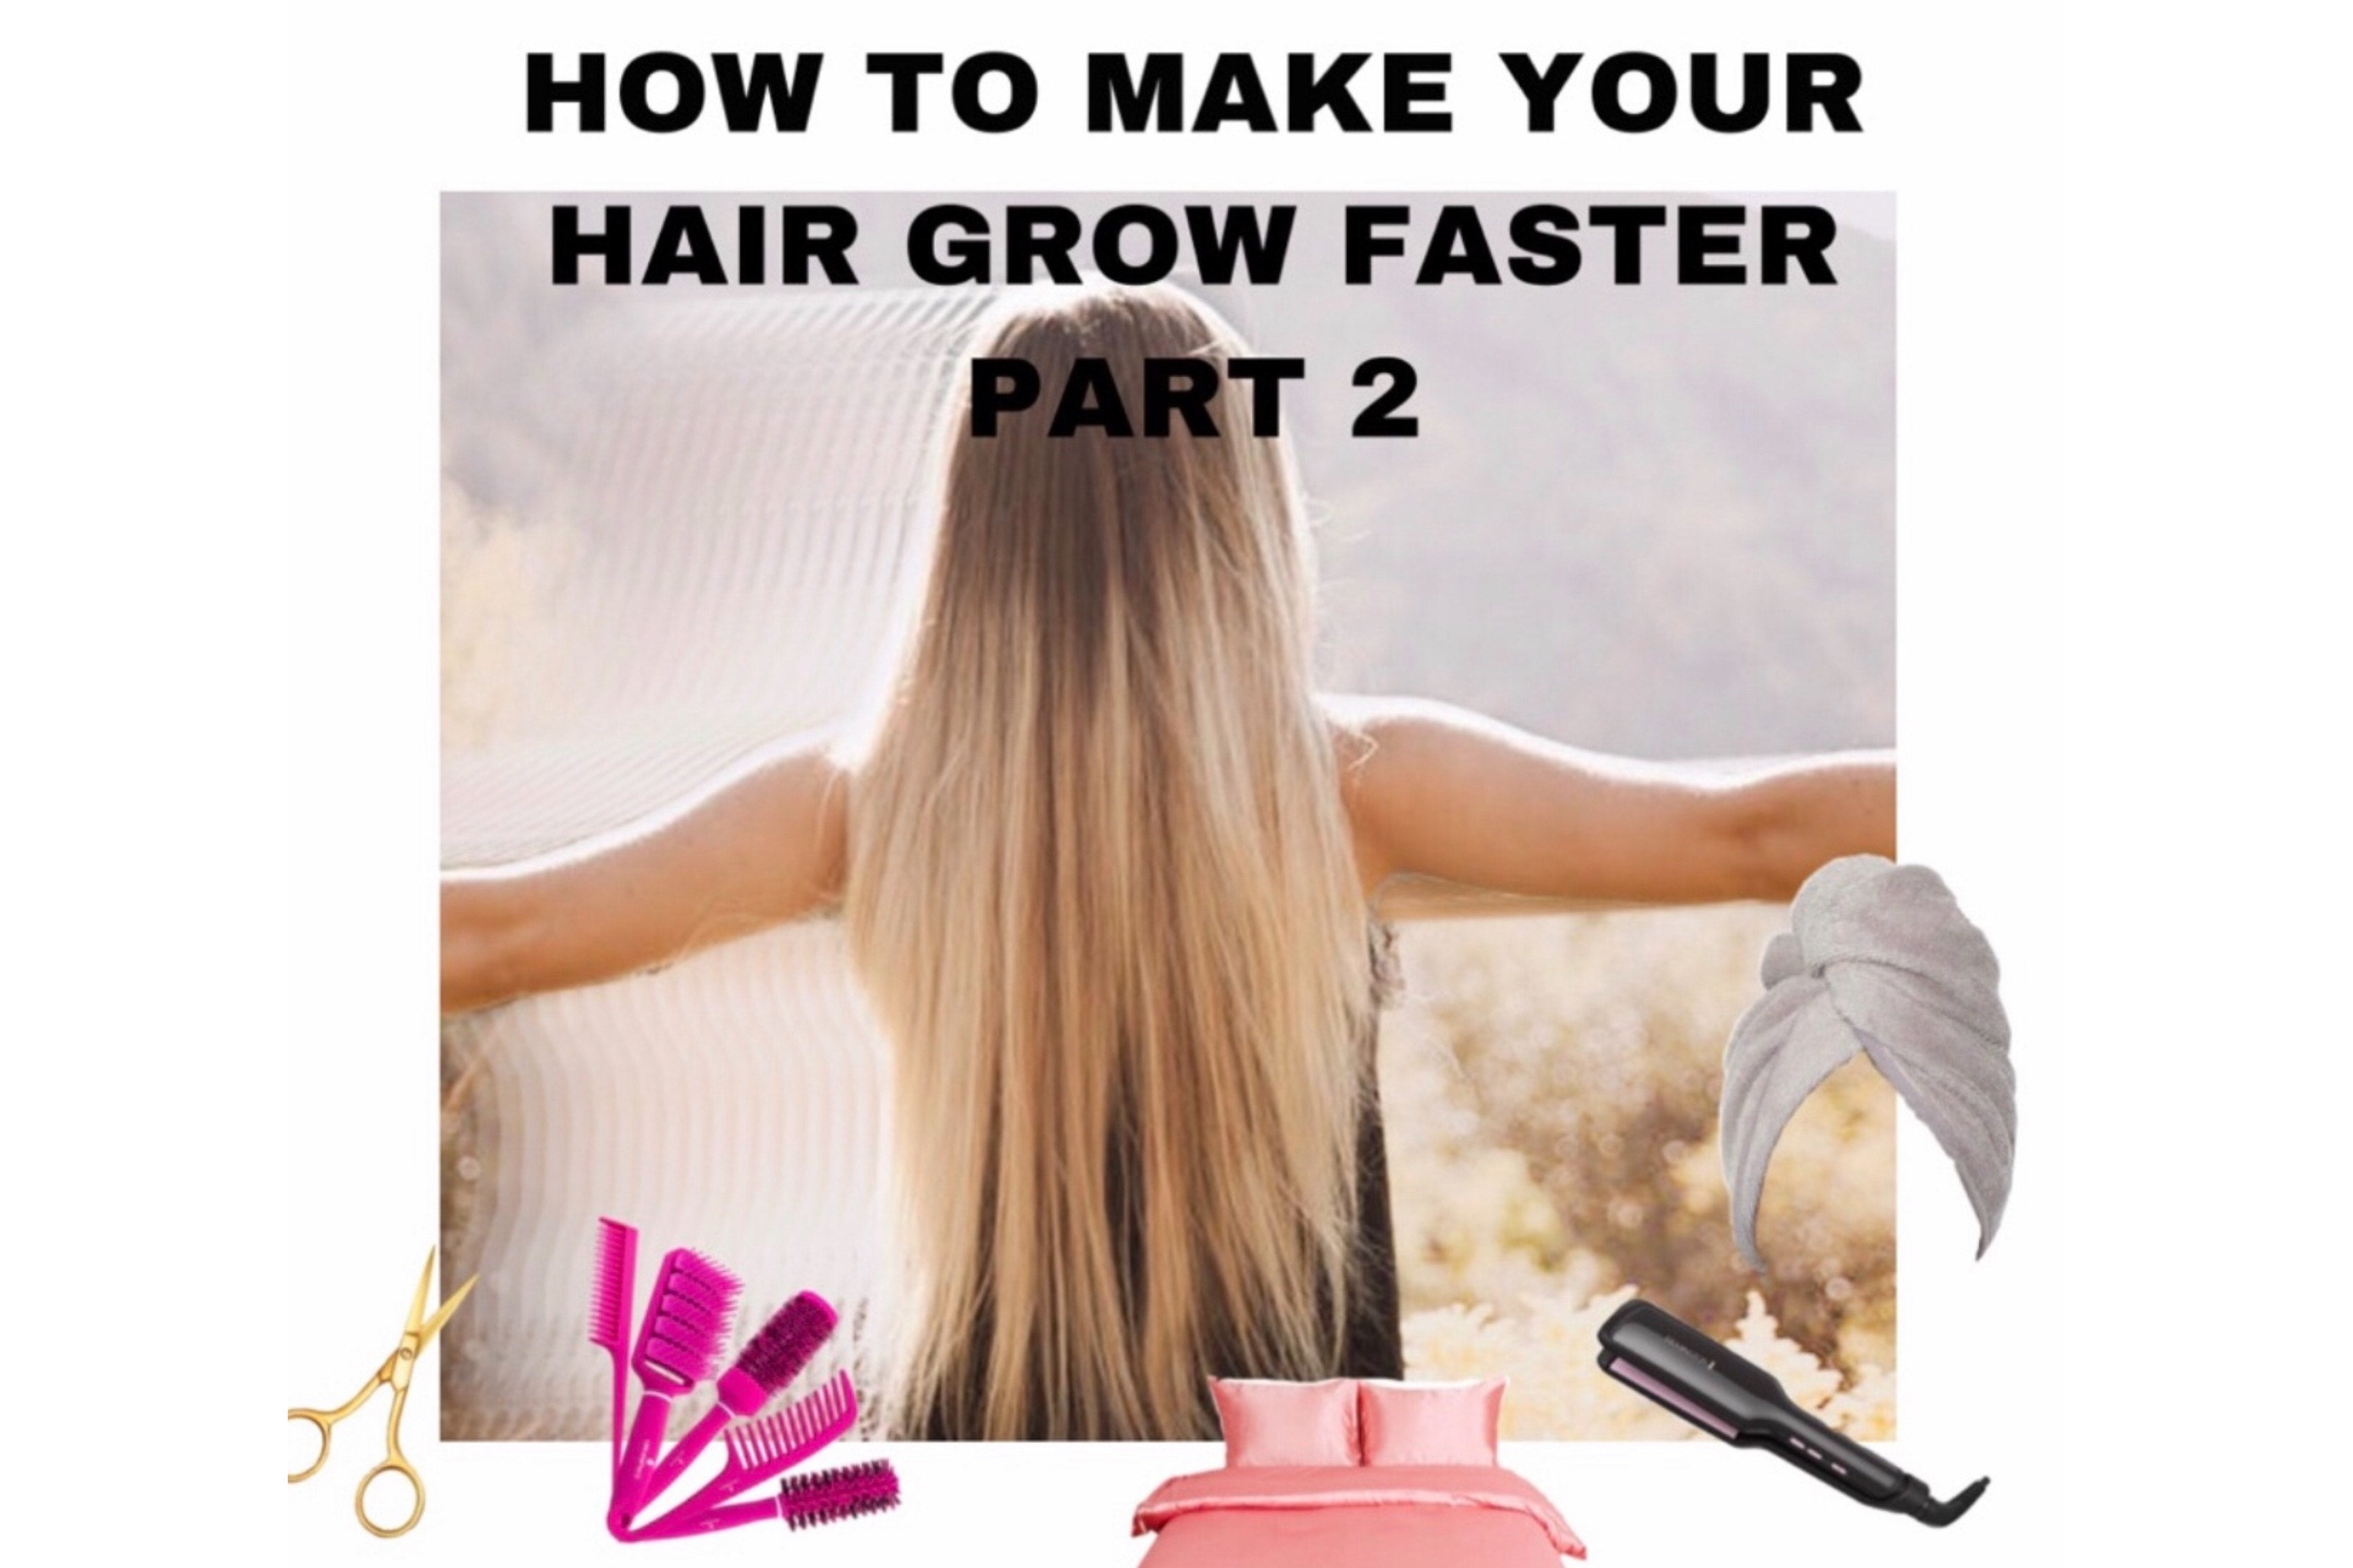 How To Make Your Hair Grow Faster, Part 2 - Progen Active Care